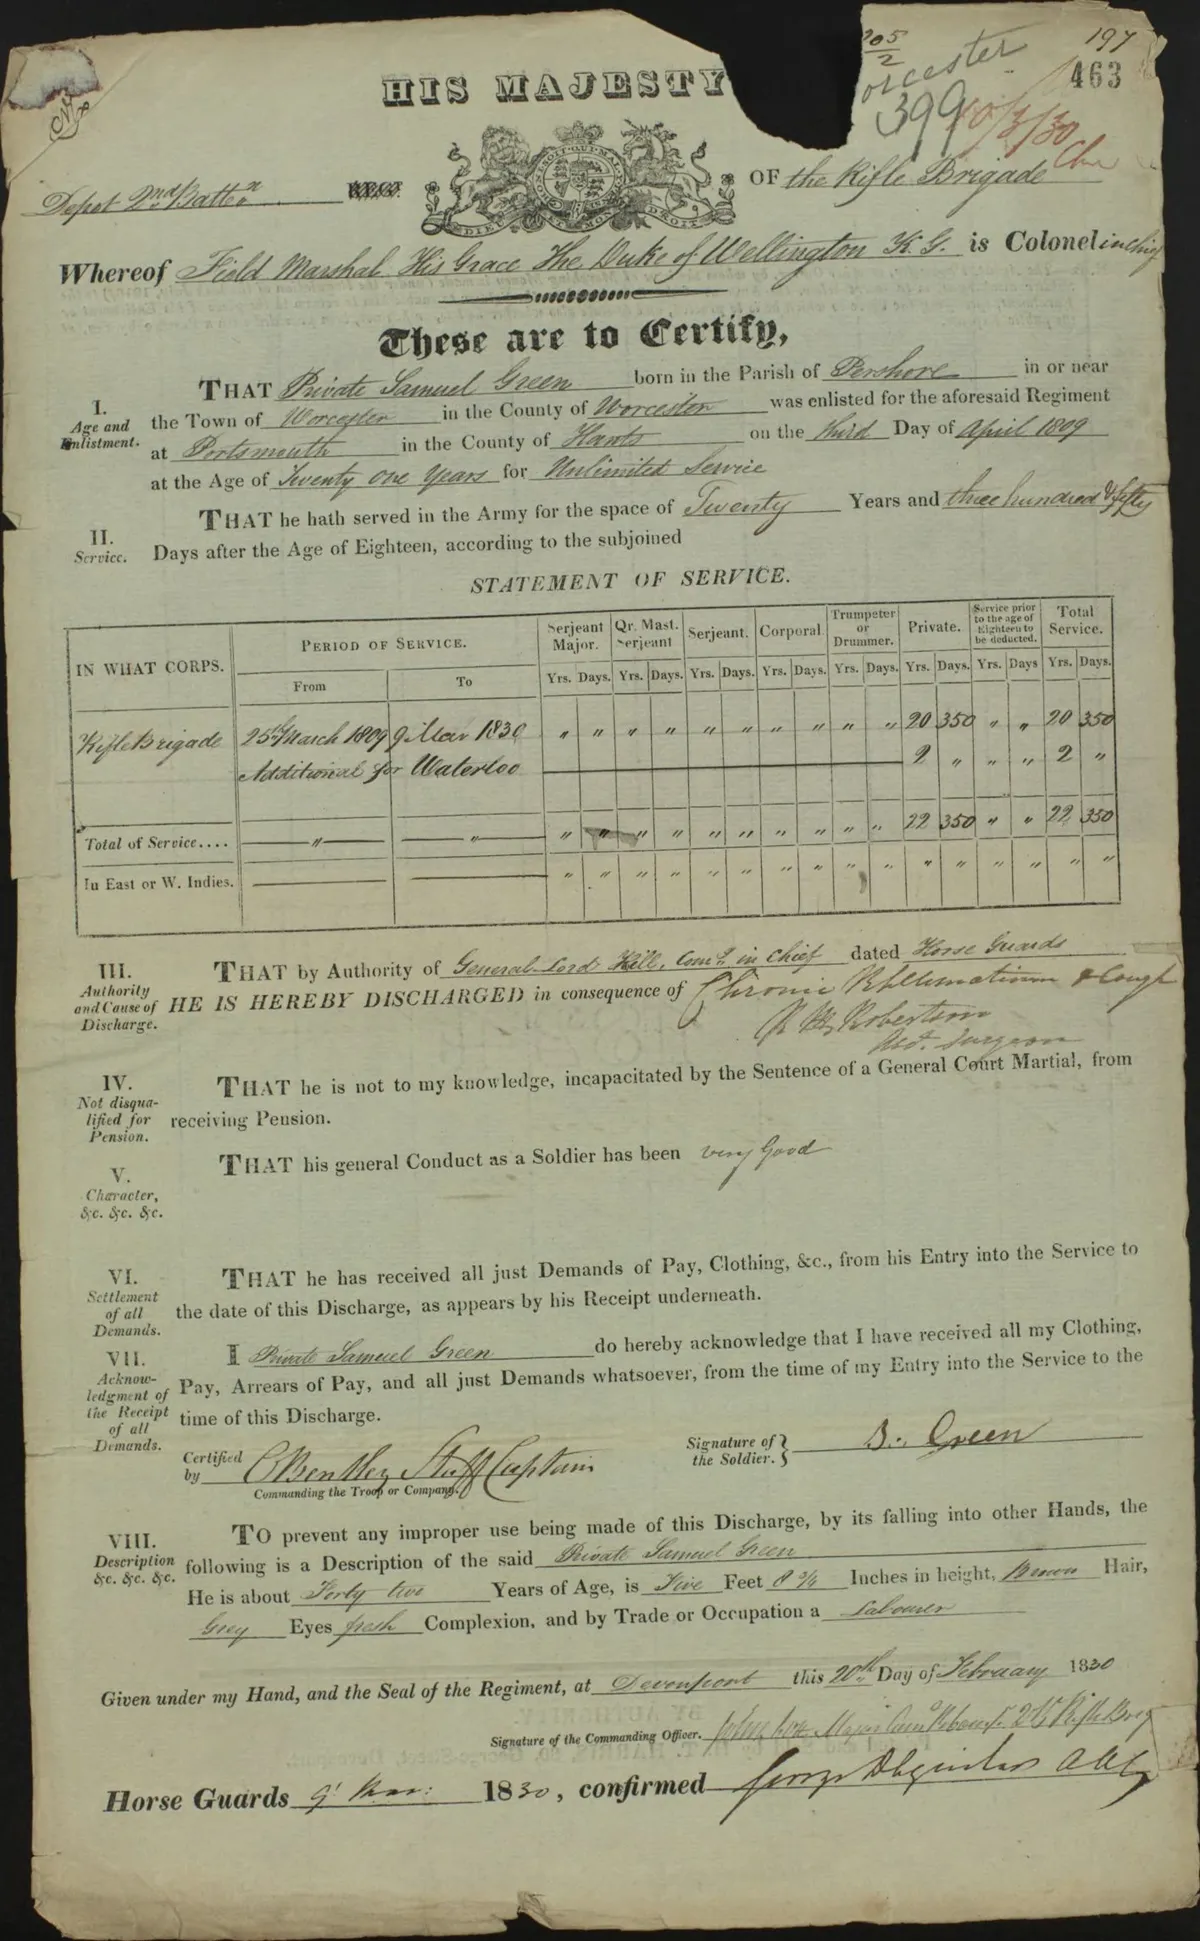 A Chelsea Pensioners' service record for Samuel Green, who enlisted in 1809